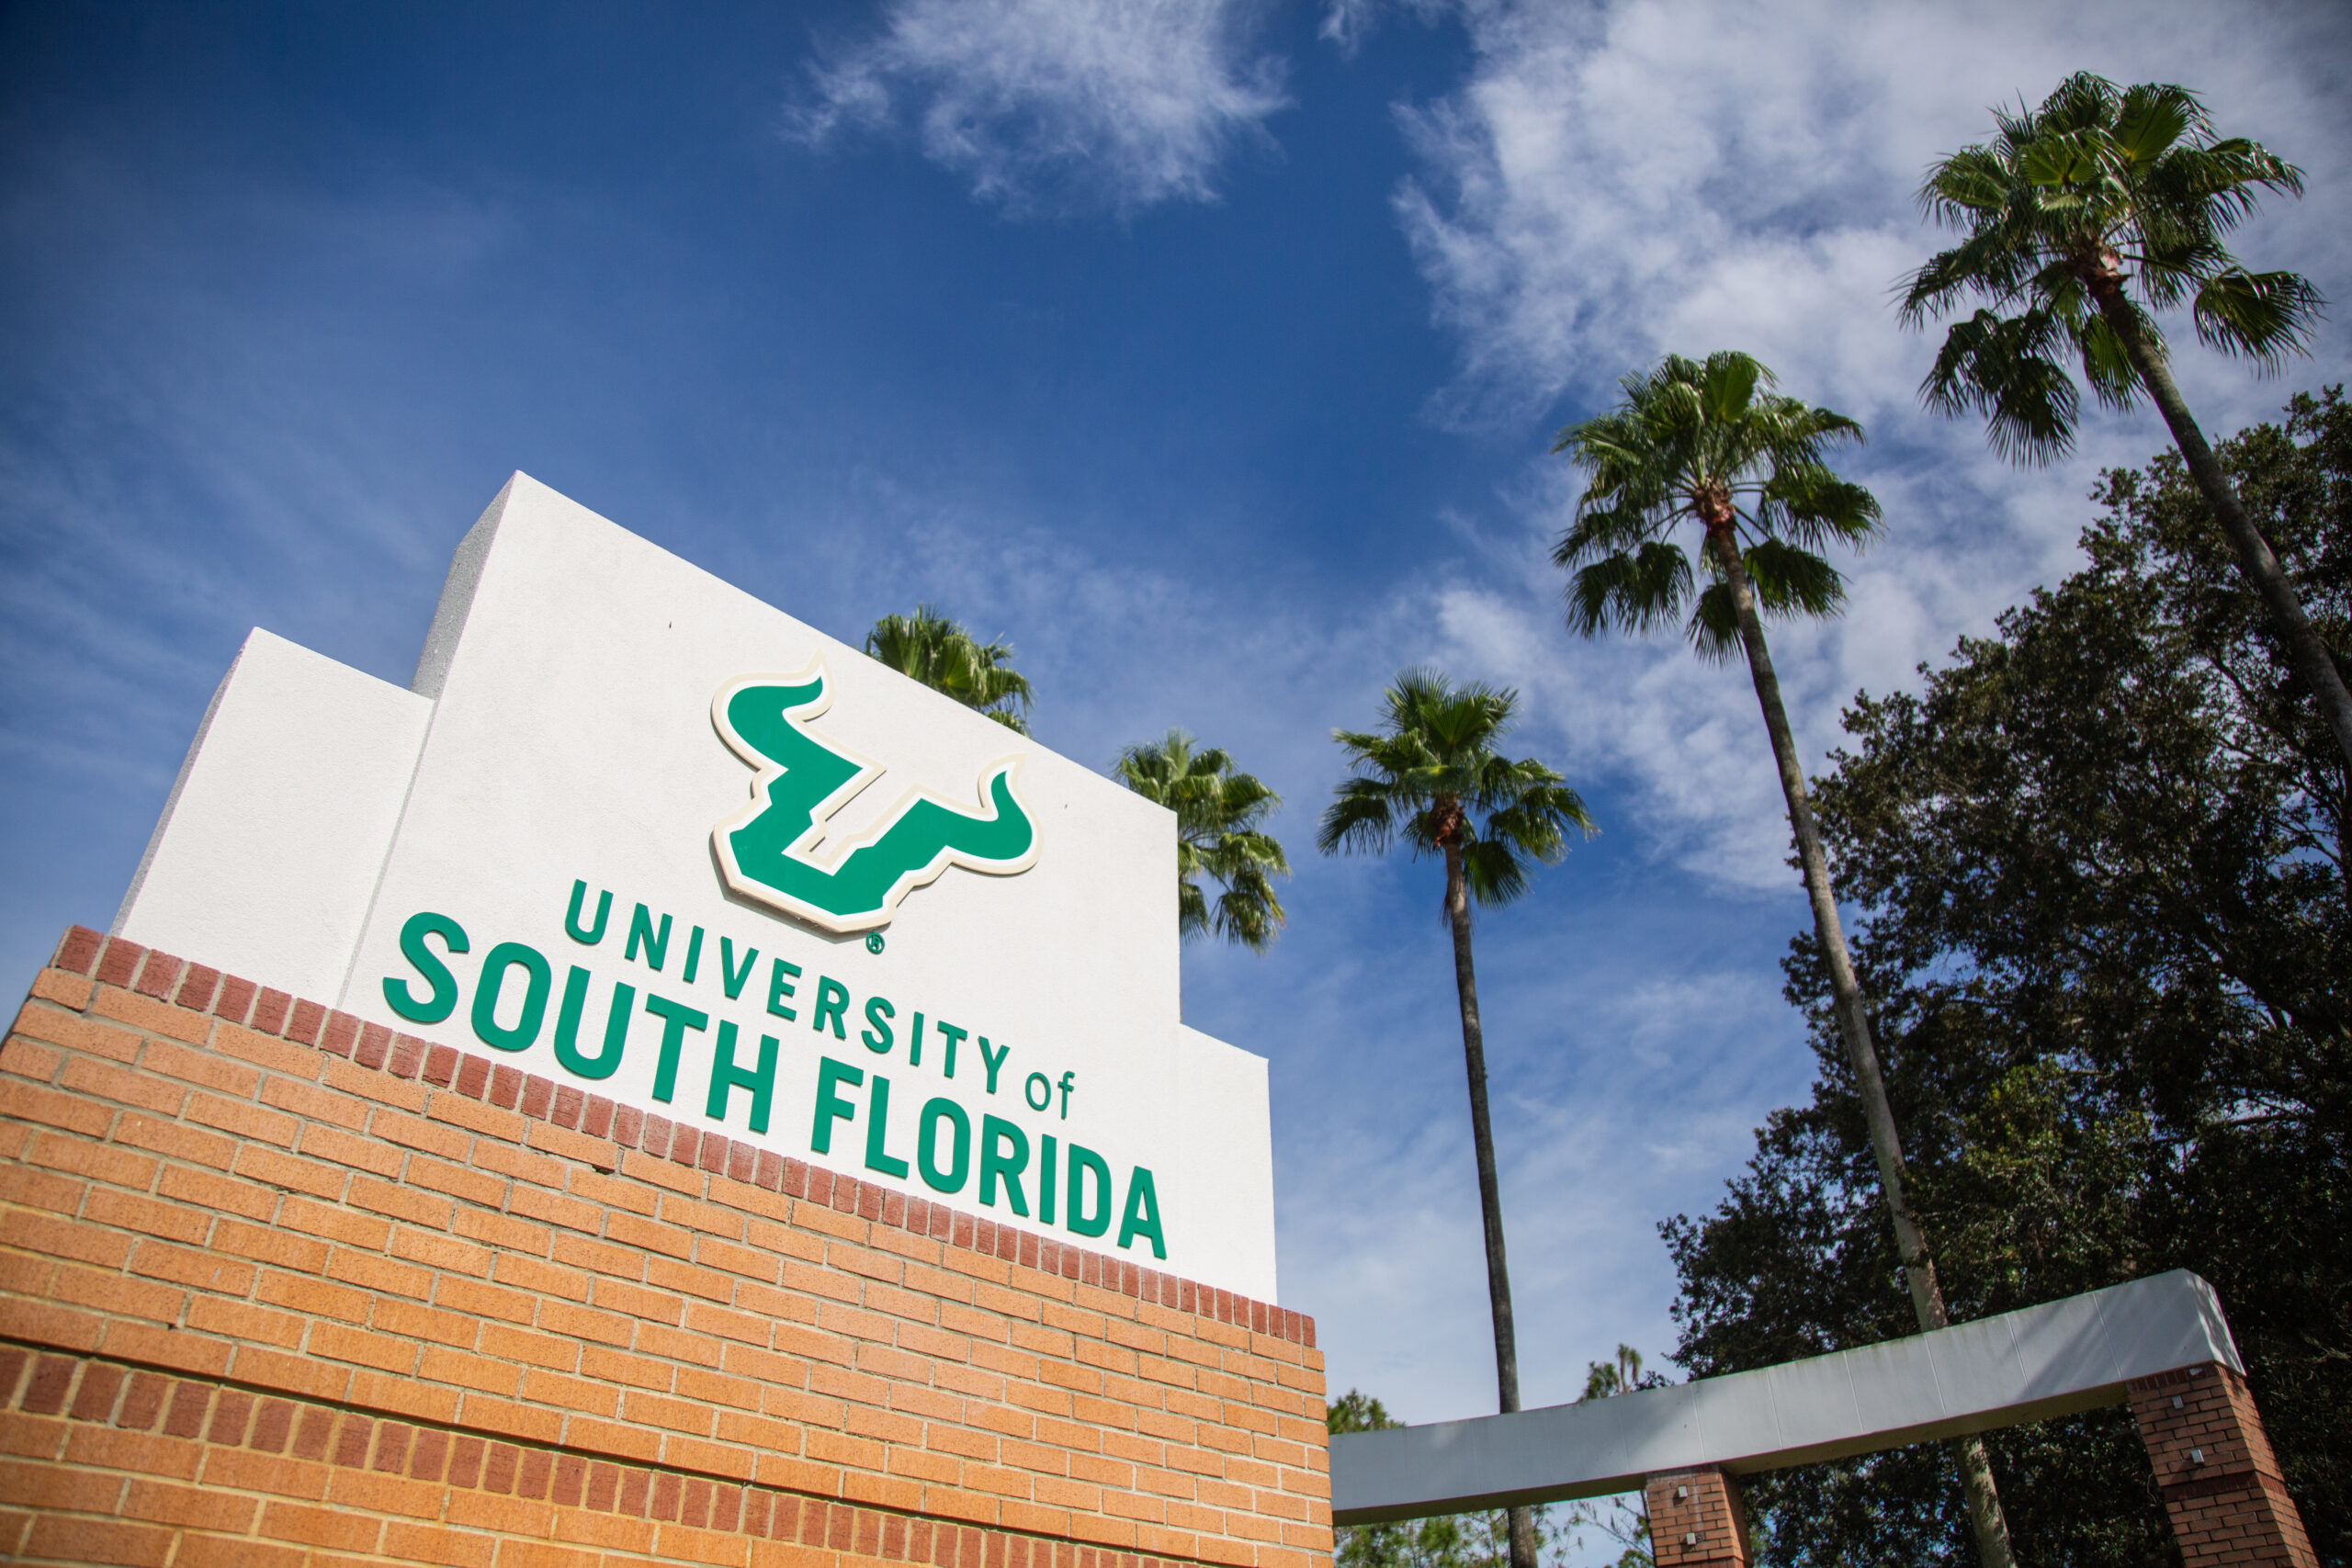 Fresh look: USF updates campus entrance monuments, signs